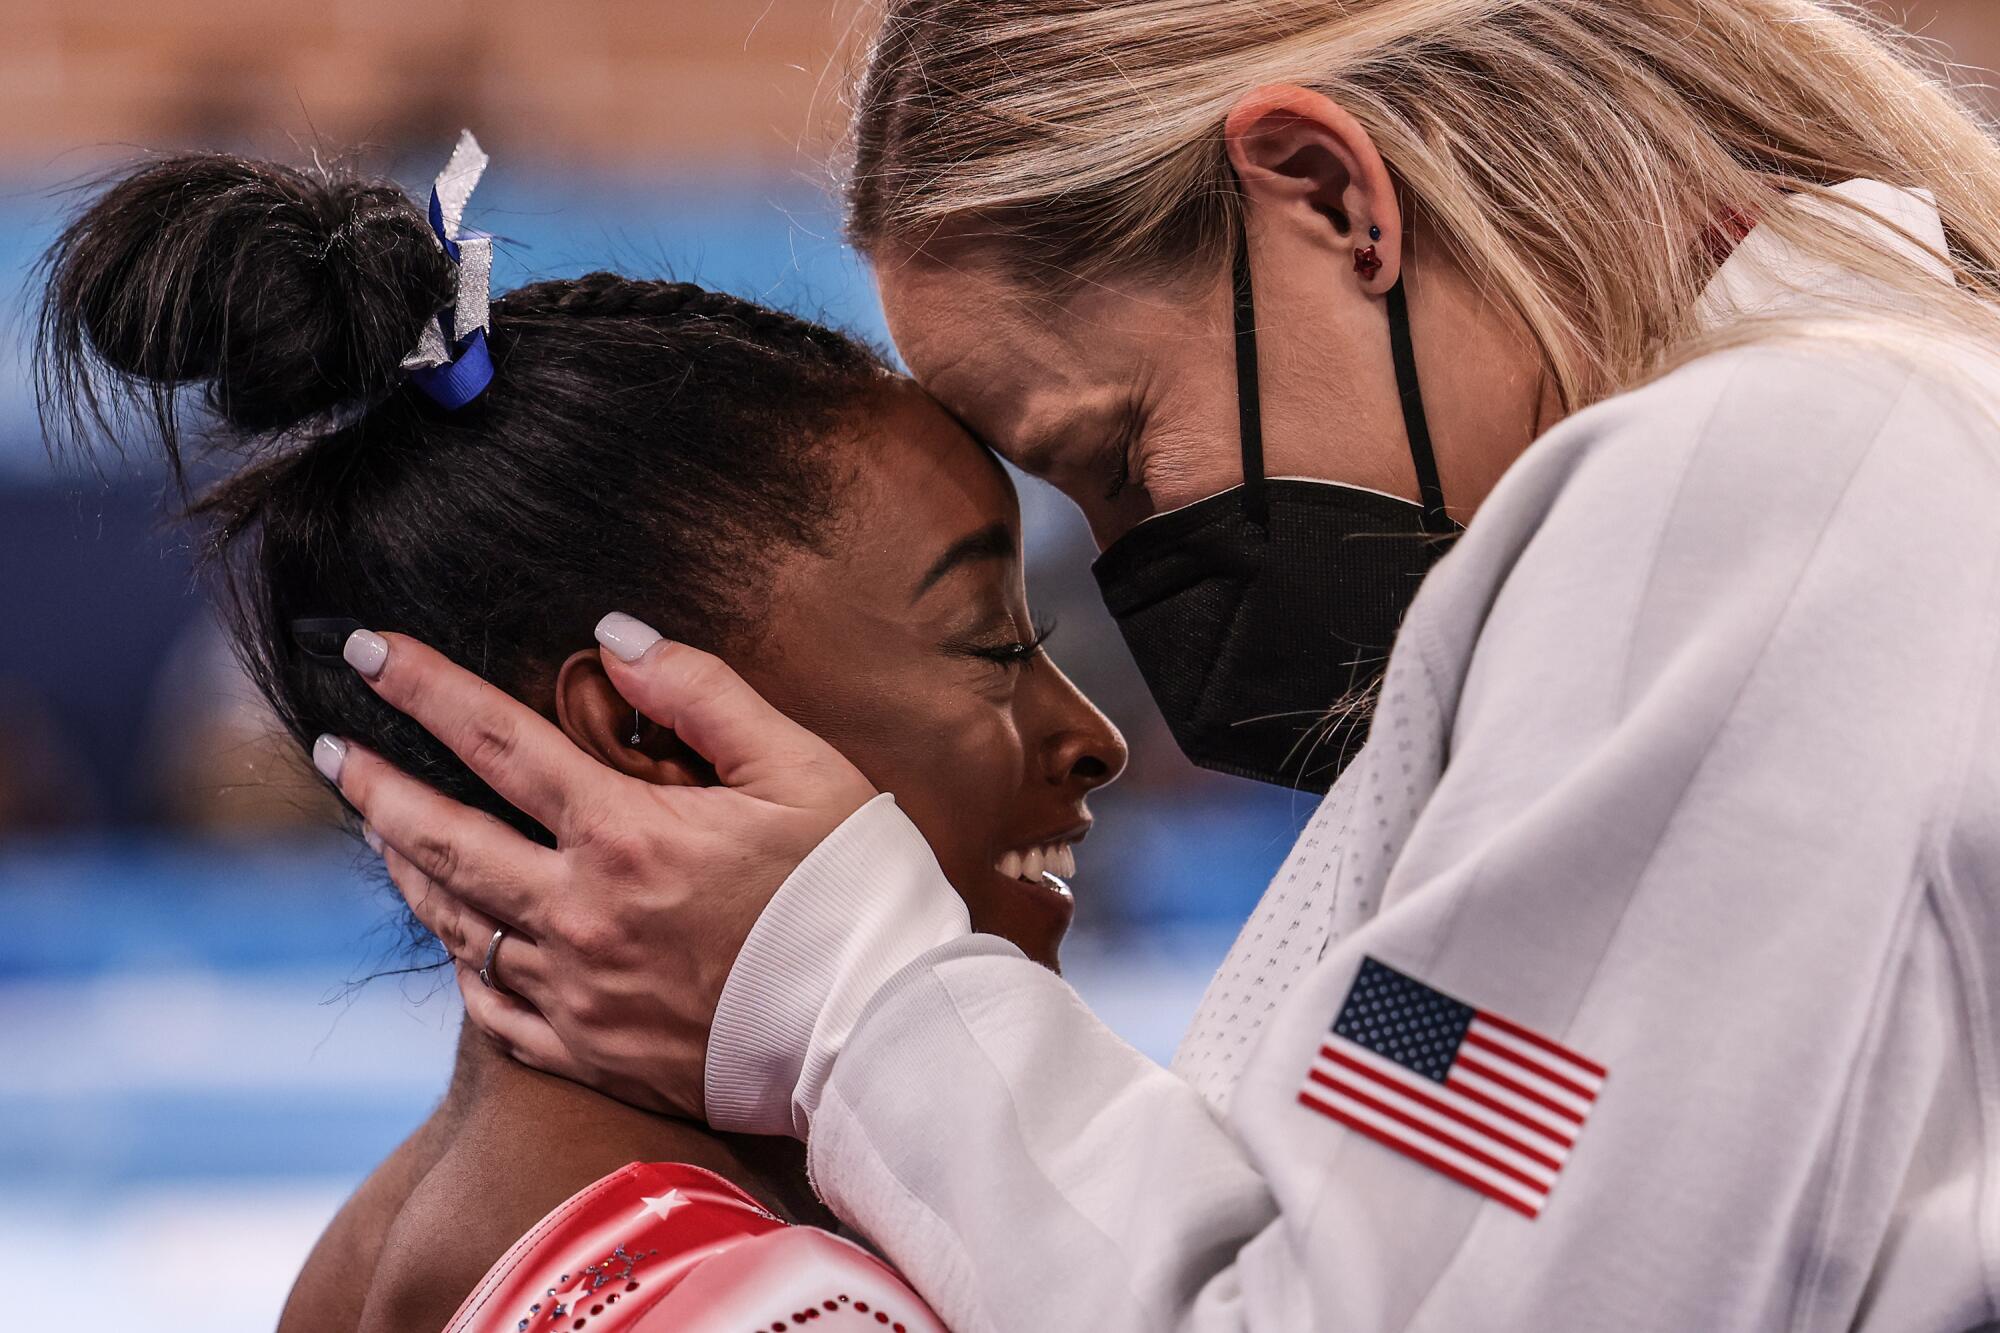 USA gymnast Simone Biles is congratulated by her coach Cecile Landi as it becomes evident she will earn a medal.